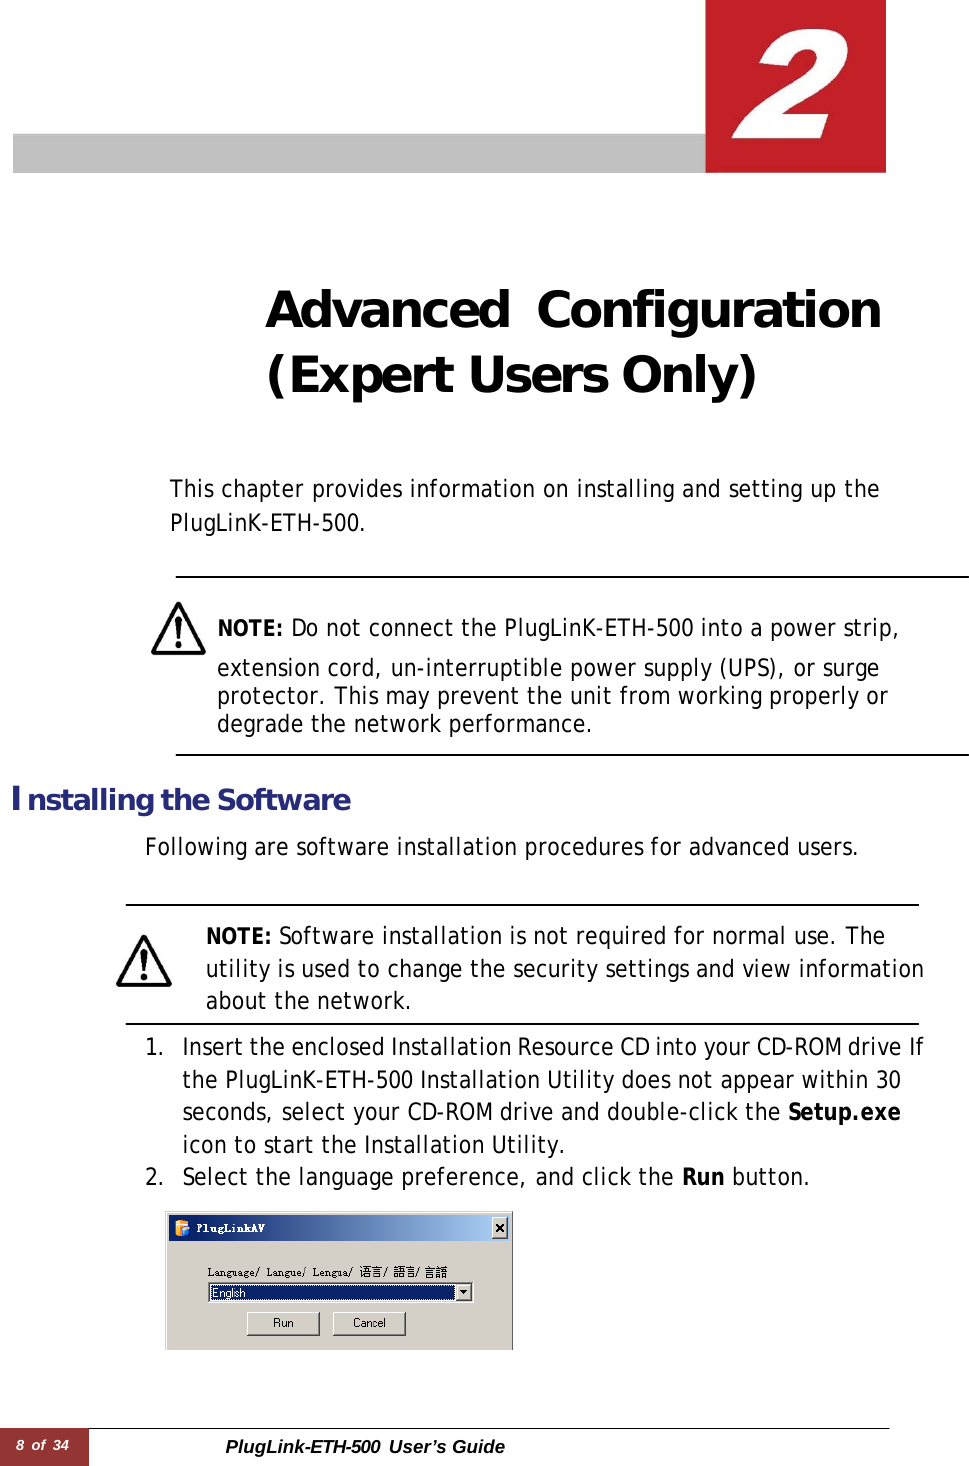 8 of 34 PlugLink-ETH-500  User’s Guide        Advanced Configuration (Expert Users Only)     This chapter provides information on installing and setting up the PlugLinK-ETH-500.      NOTE: Do not connect the PlugLinK-ETH-500 into a power strip, extension cord, un-interruptible power supply (UPS), or surge protector. This may prevent the unit from working properly or degrade the network performance.    Installing the Software  Following are software installation procedures for advanced users.    NOTE: Software installation is not required for normal use. The utility is used to change the security settings and view information about the network.  1. Insert the enclosed Installation Resource CD into your CD-ROM drive If the PlugLinK-ETH-500 Installation Utility does not appear within 30 seconds, select your CD-ROM drive and double-click the Setup.exe icon to start the Installation Utility. 2. Select the language preference, and click the Run button.   